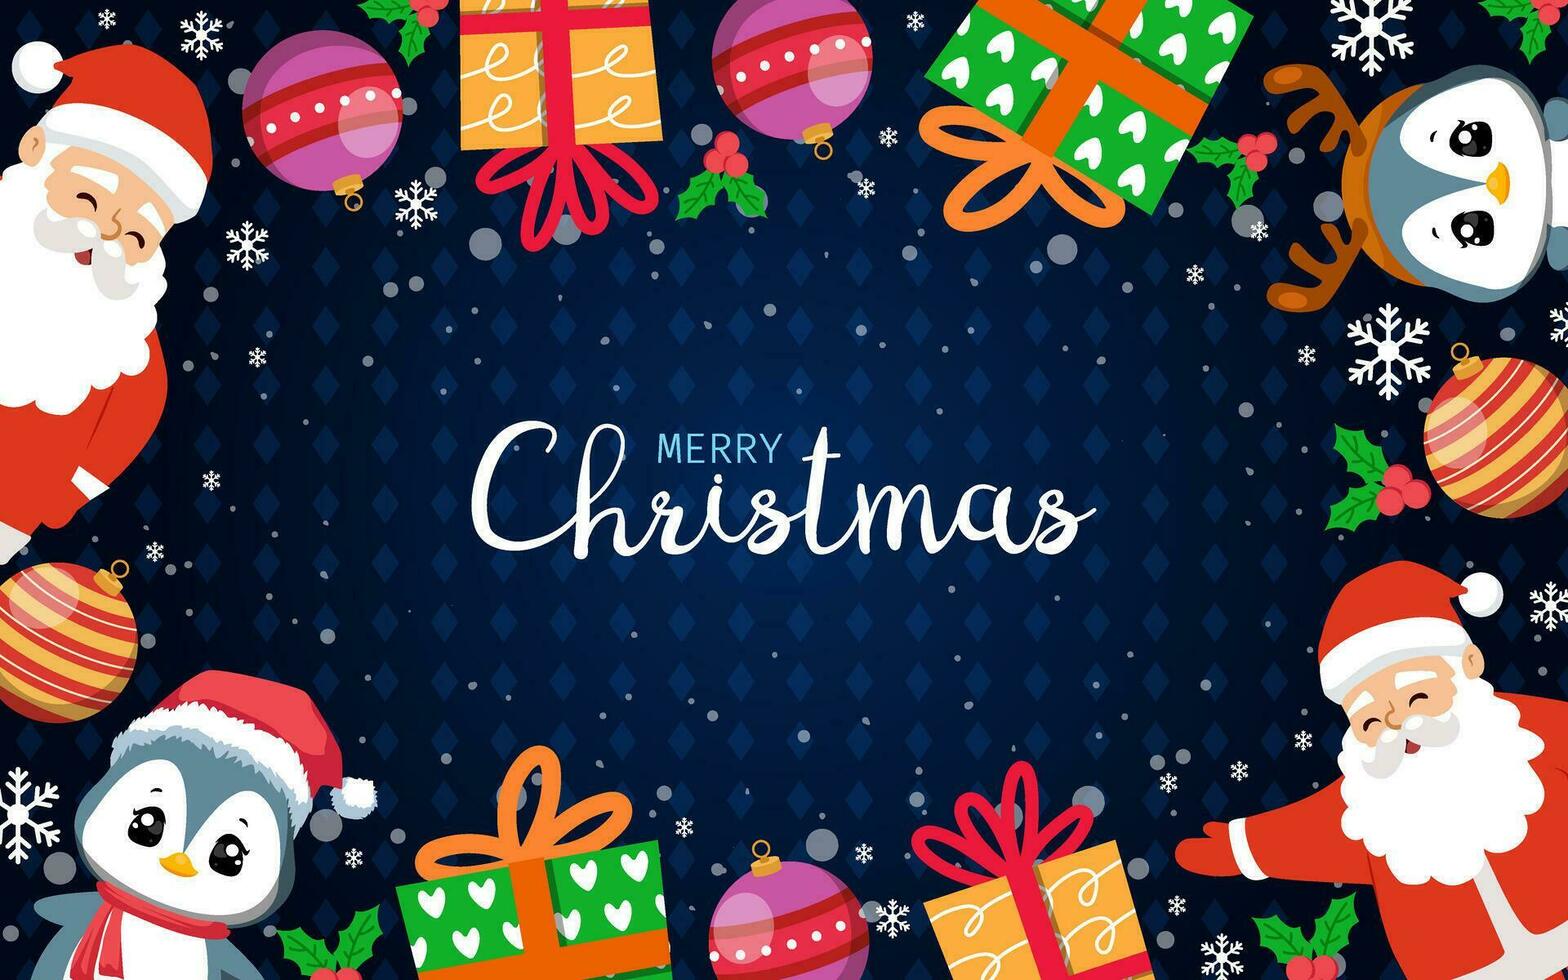 Merry Christmas Background with Santa Element vector